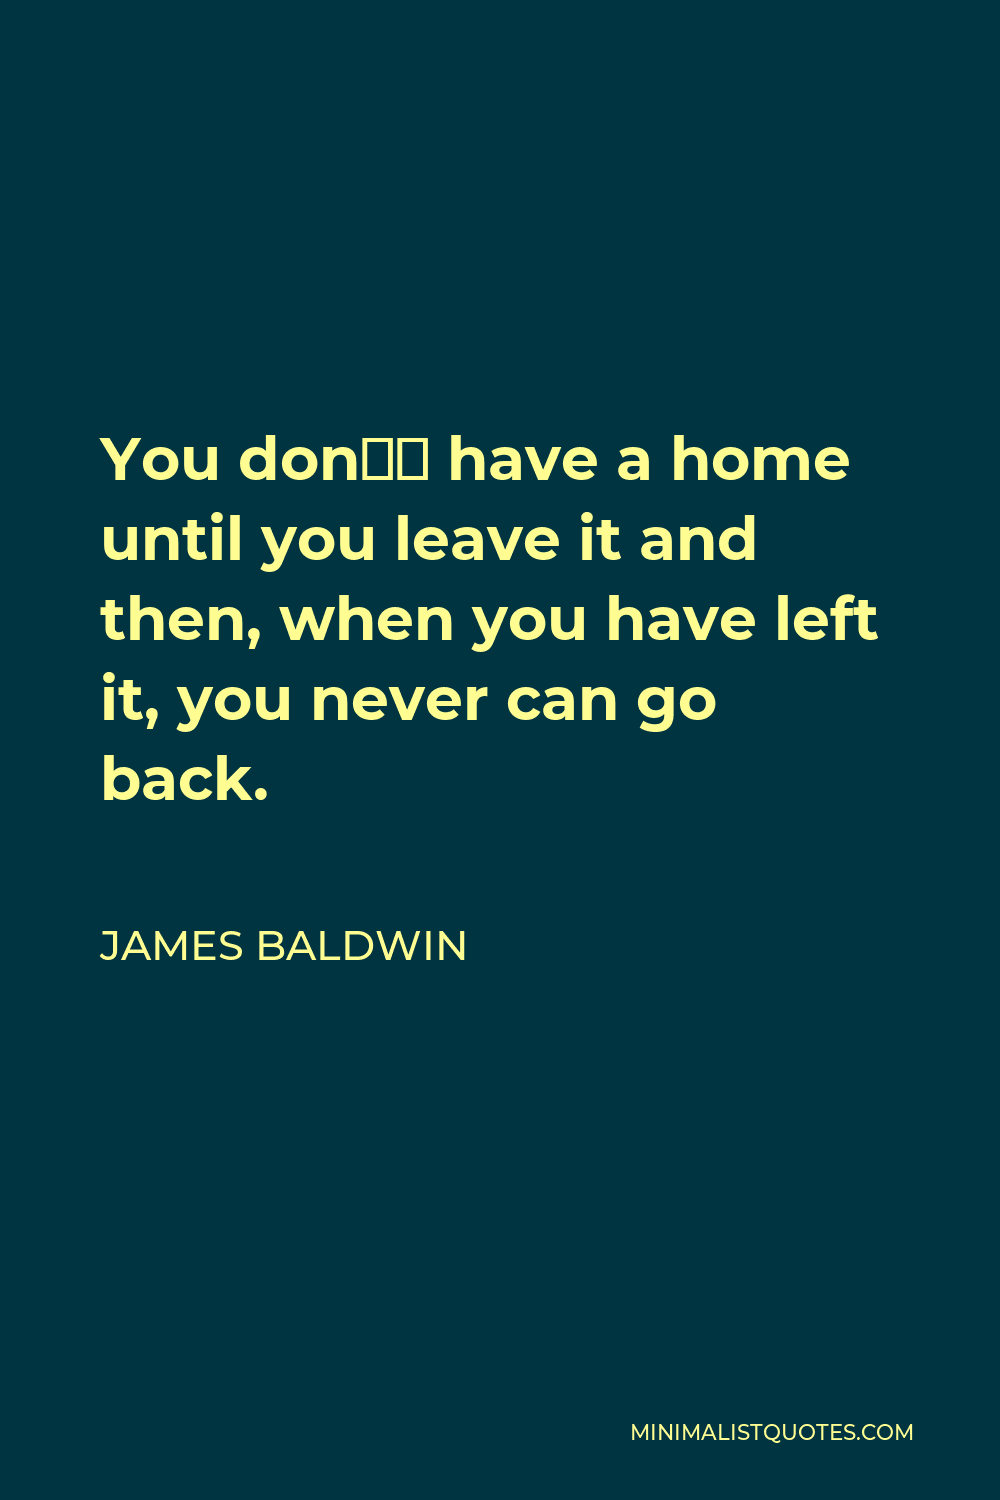 James Baldwin Quote - You don’t have a home until you leave it and then, when you have left it, you never can go back.